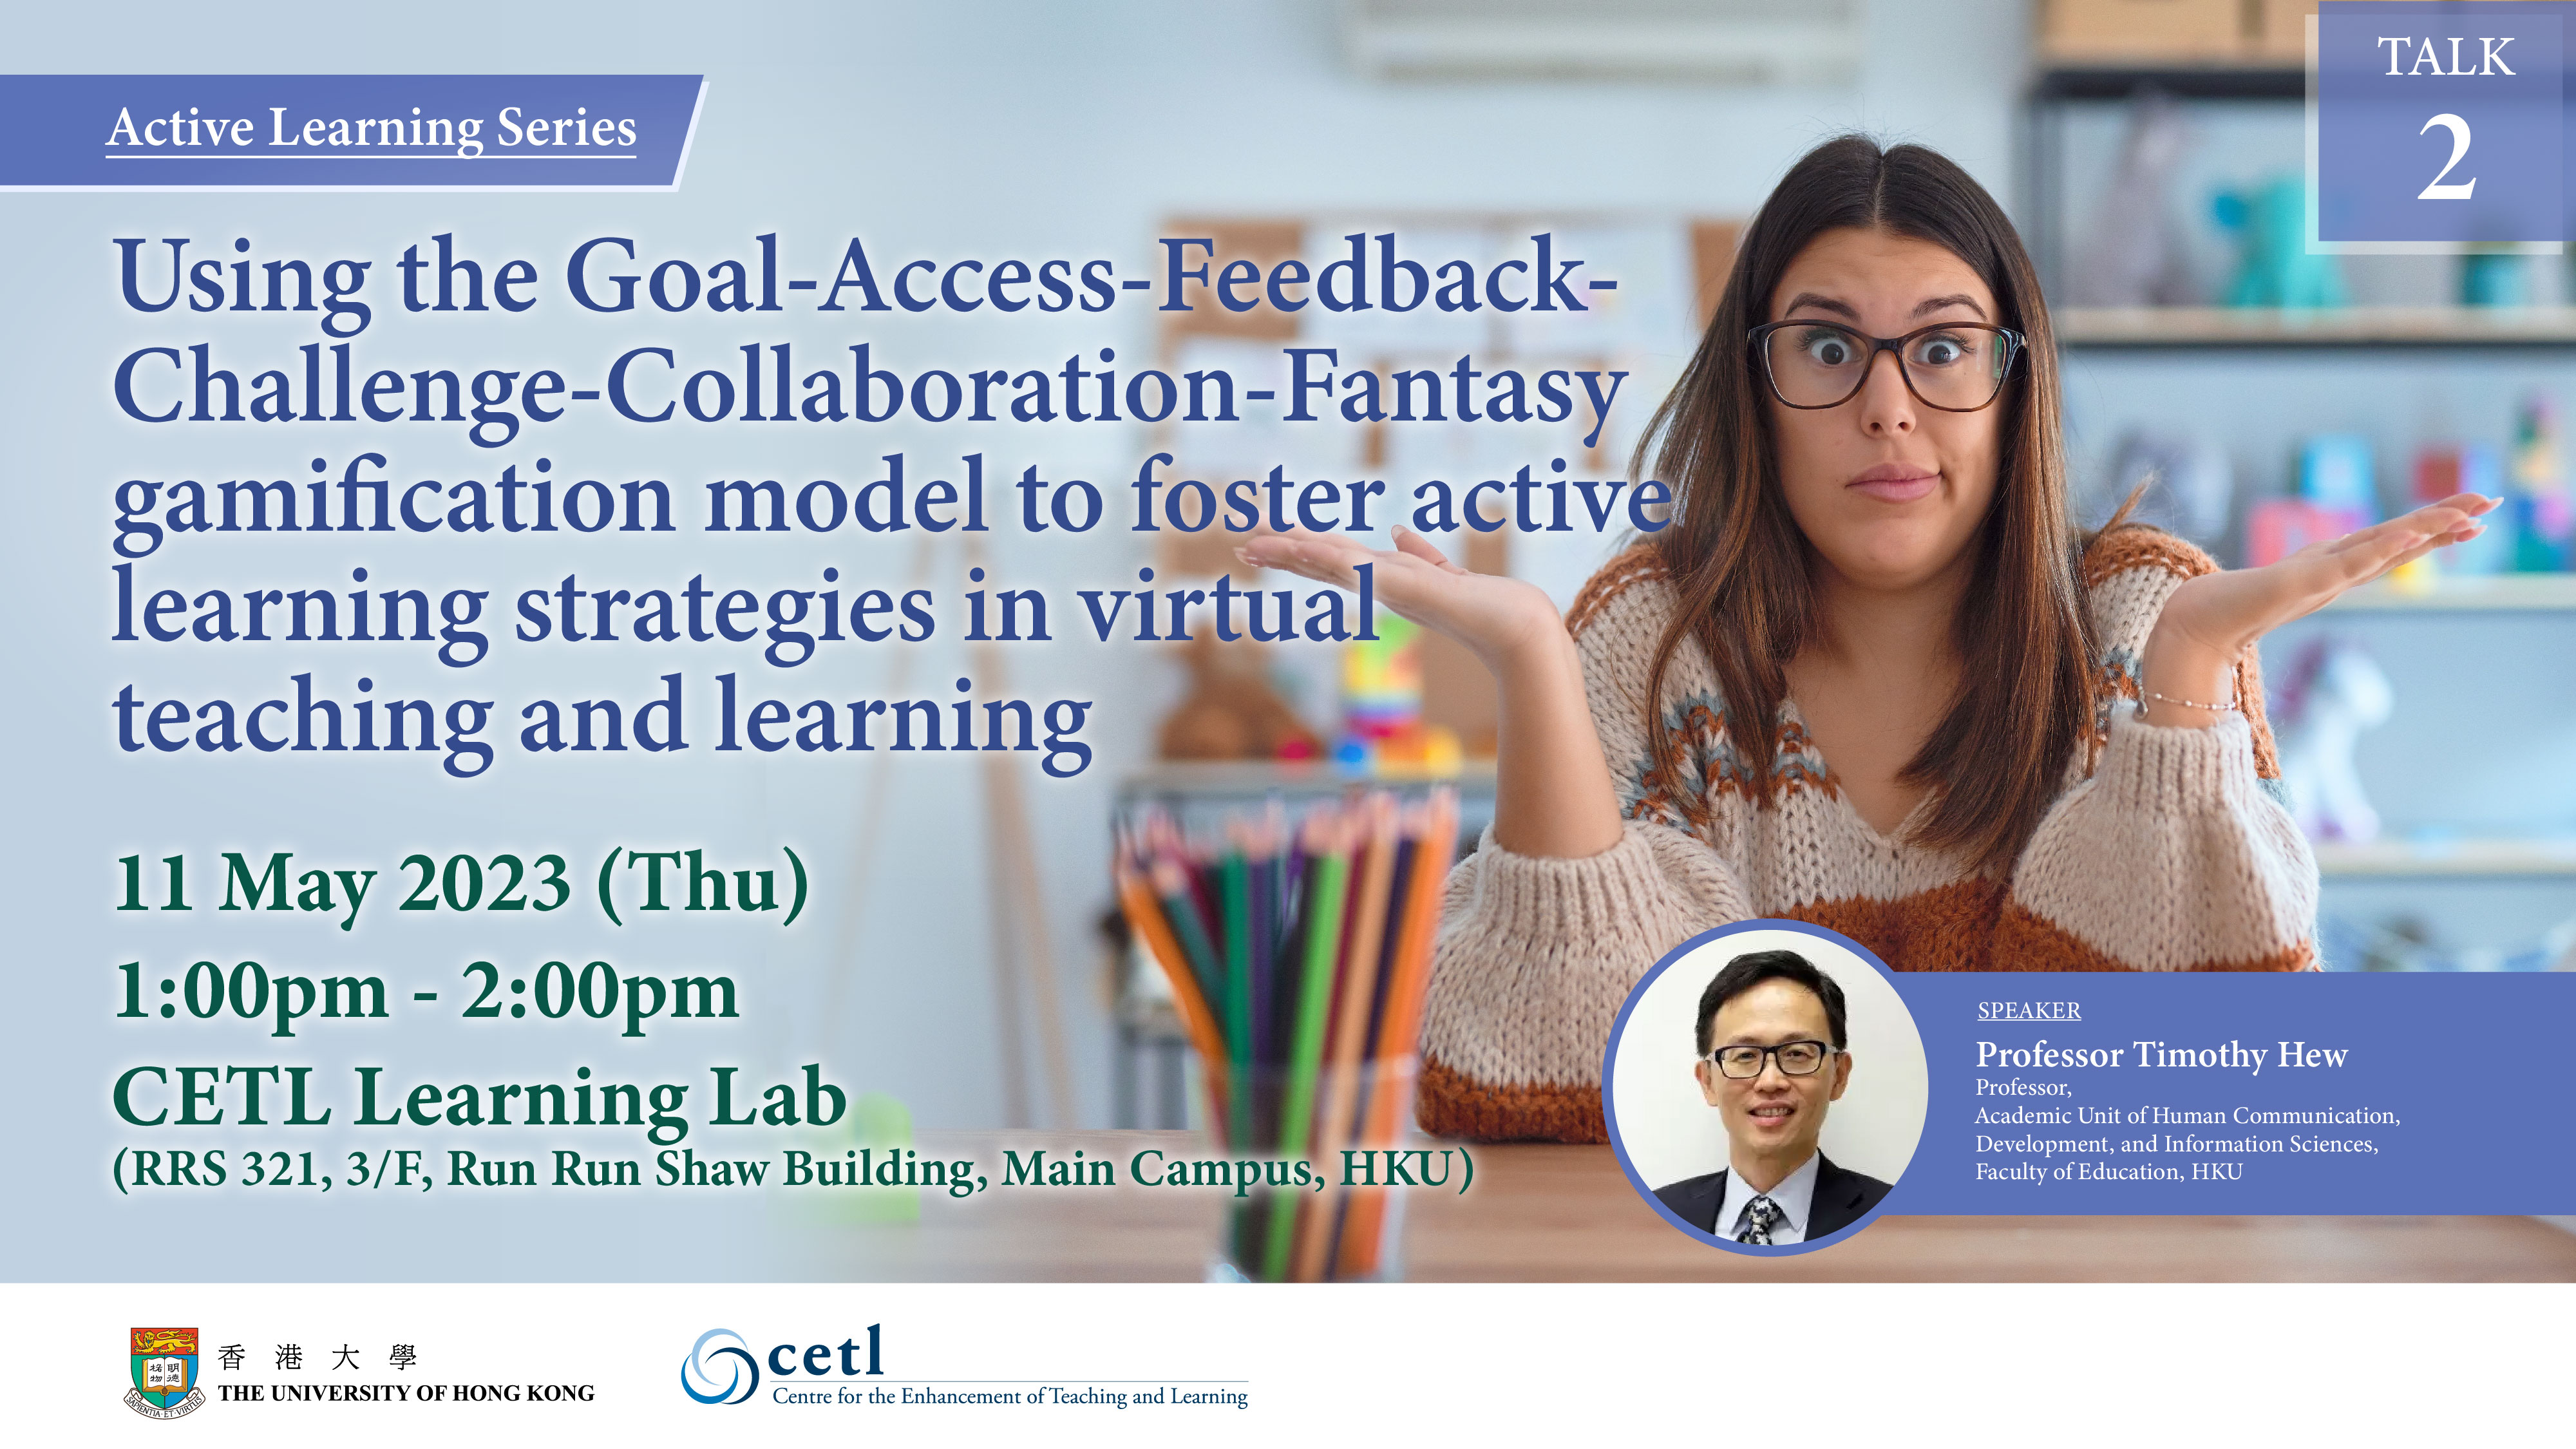 Talk 2: Using the Goal-Access-Feedback-Challenge-Collaboration-Fantasy gamification model to foster active learning strategies in virtual teaching and learning